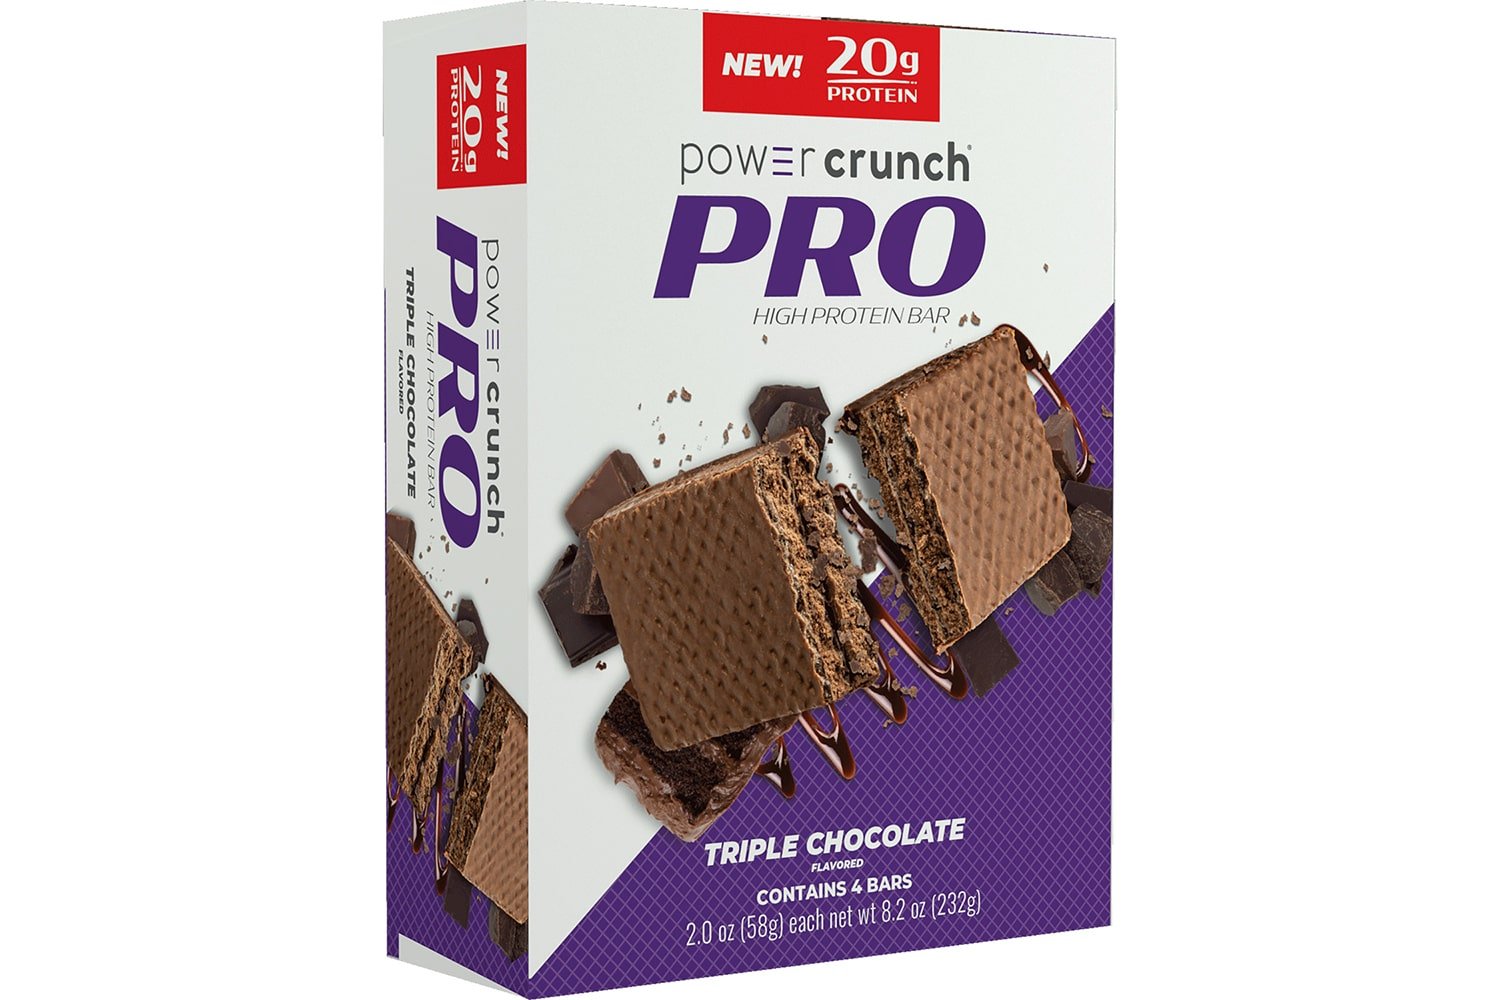 Box of Power Crunch Pro Triple Chocolate 20g protein bars